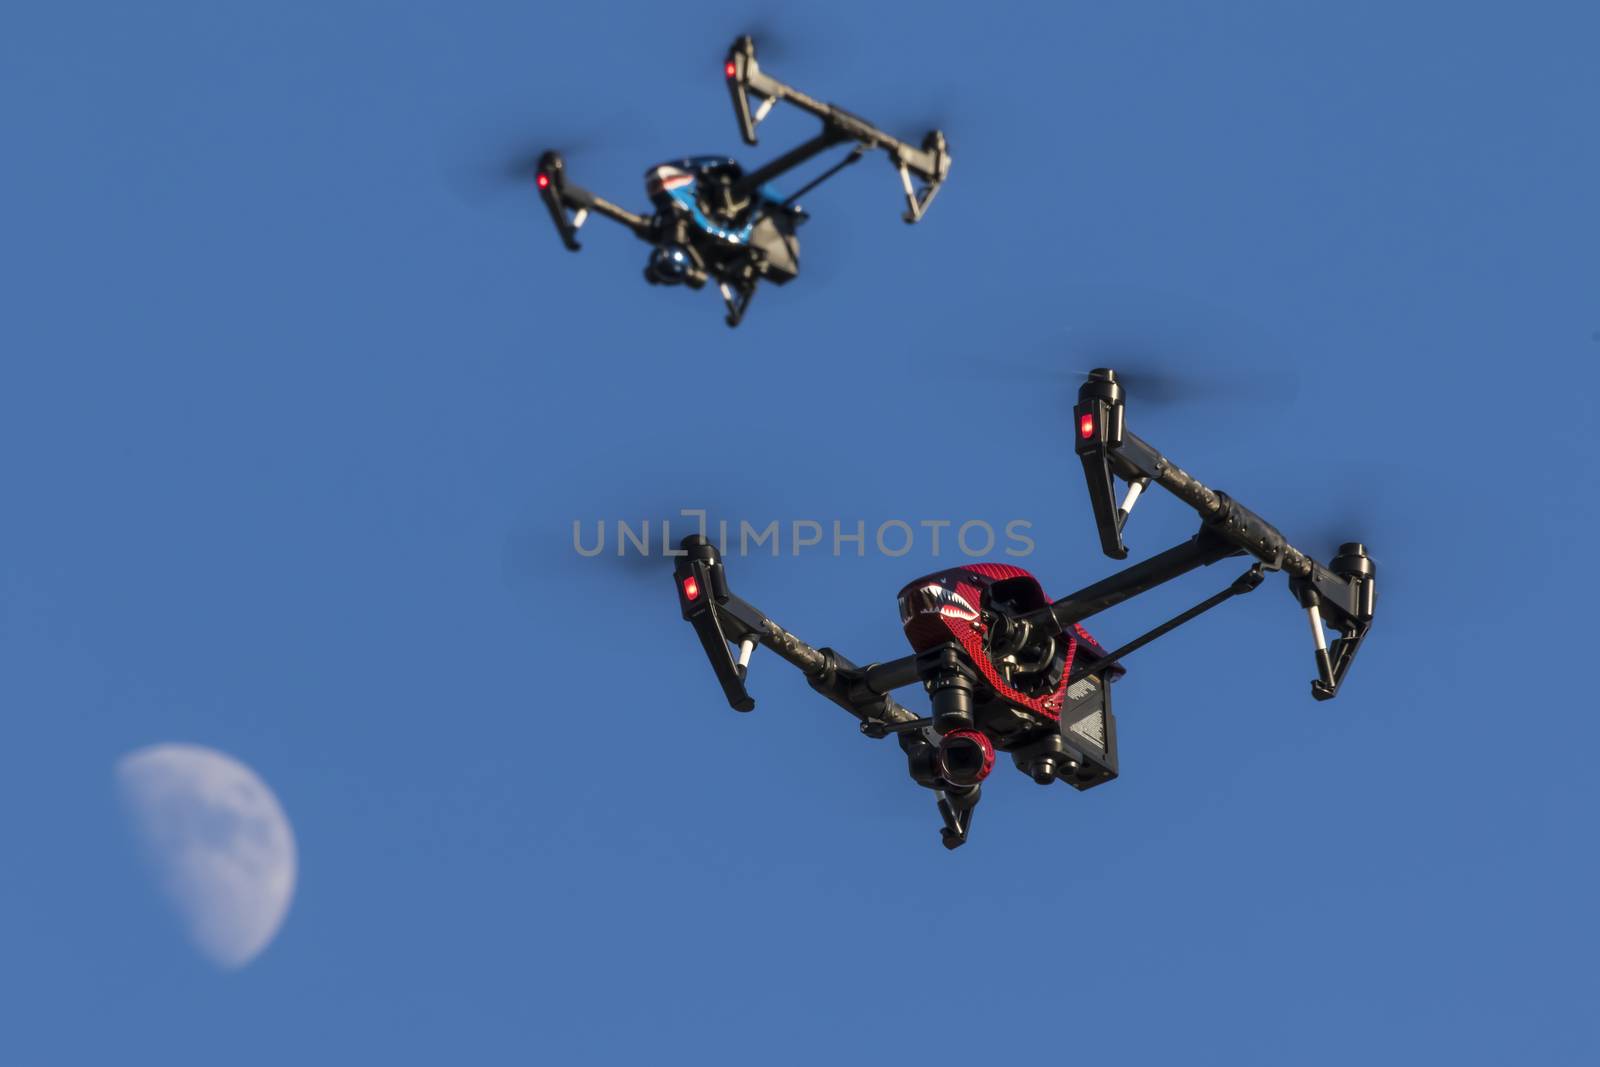 A personal drone flying through the air